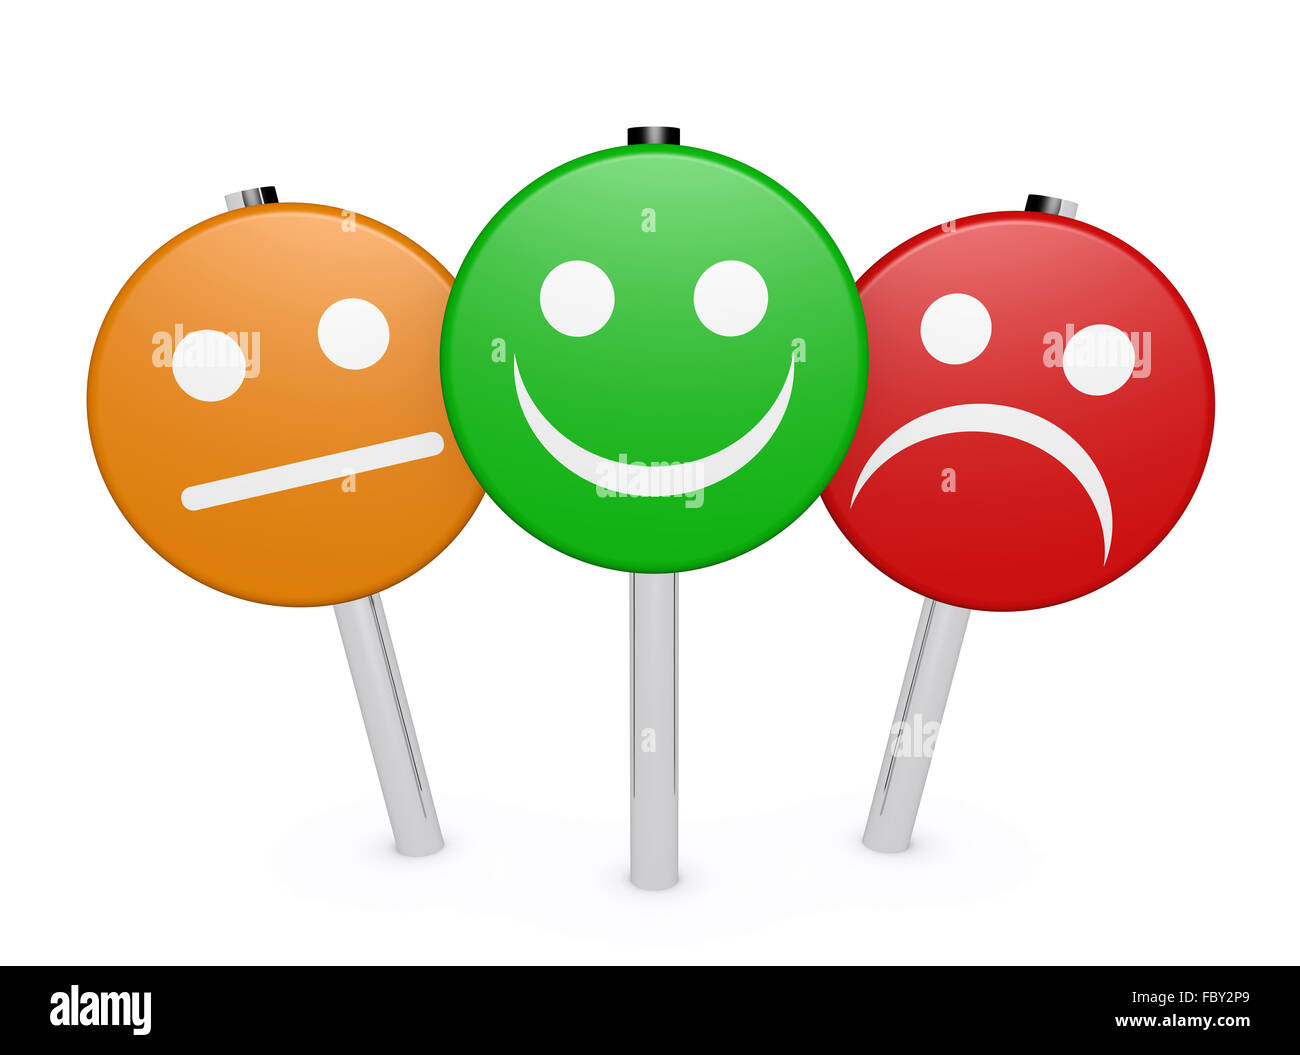 Business quality service customer feedback, rating and survey with smiling face emoticon symbol and icon on sign post on white. Stock Photo